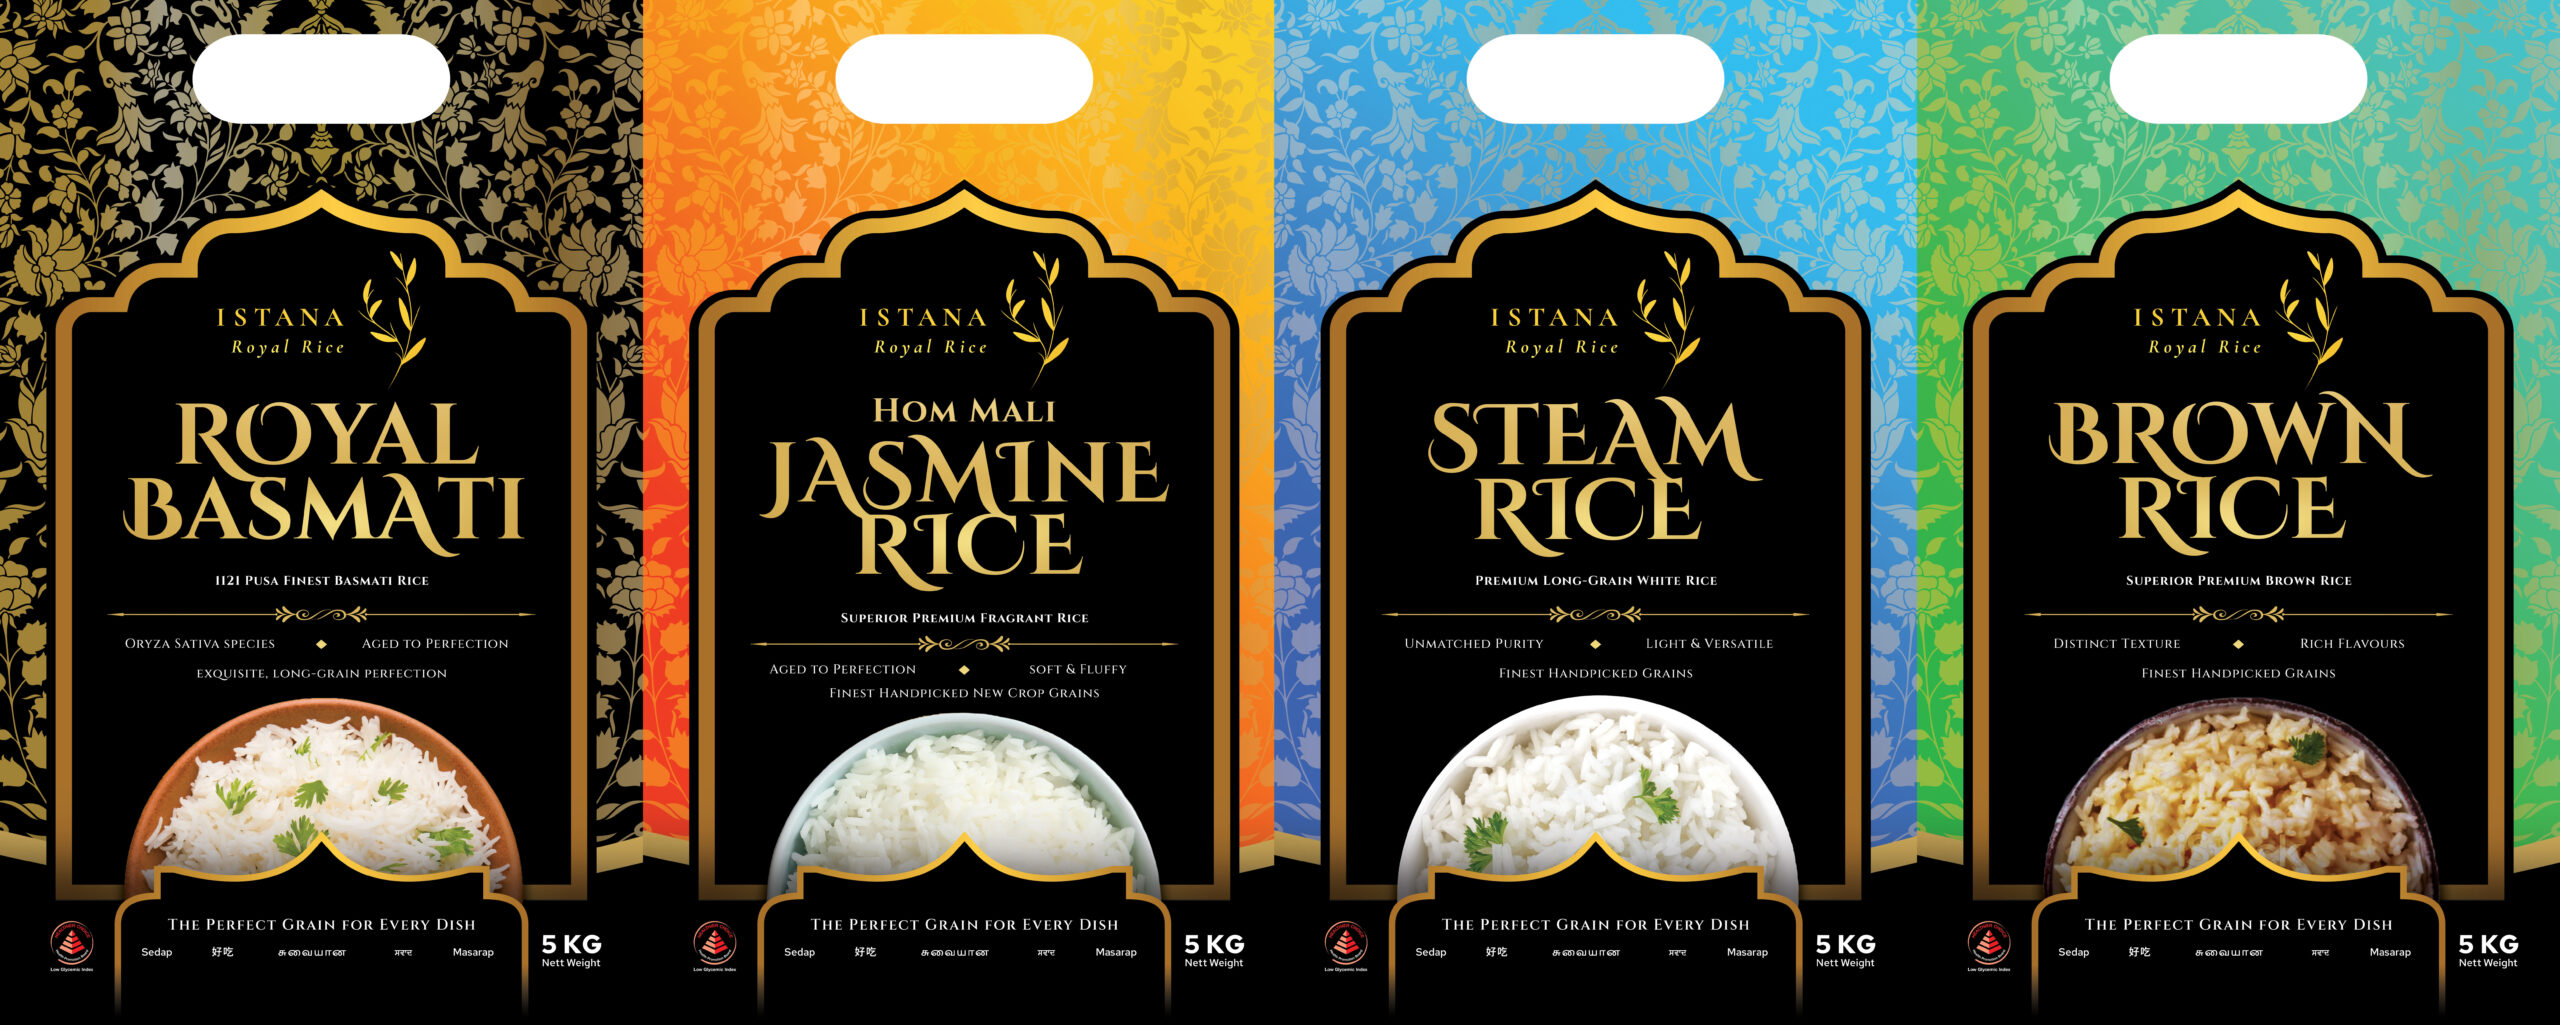 ISTANA Royal Rice Products